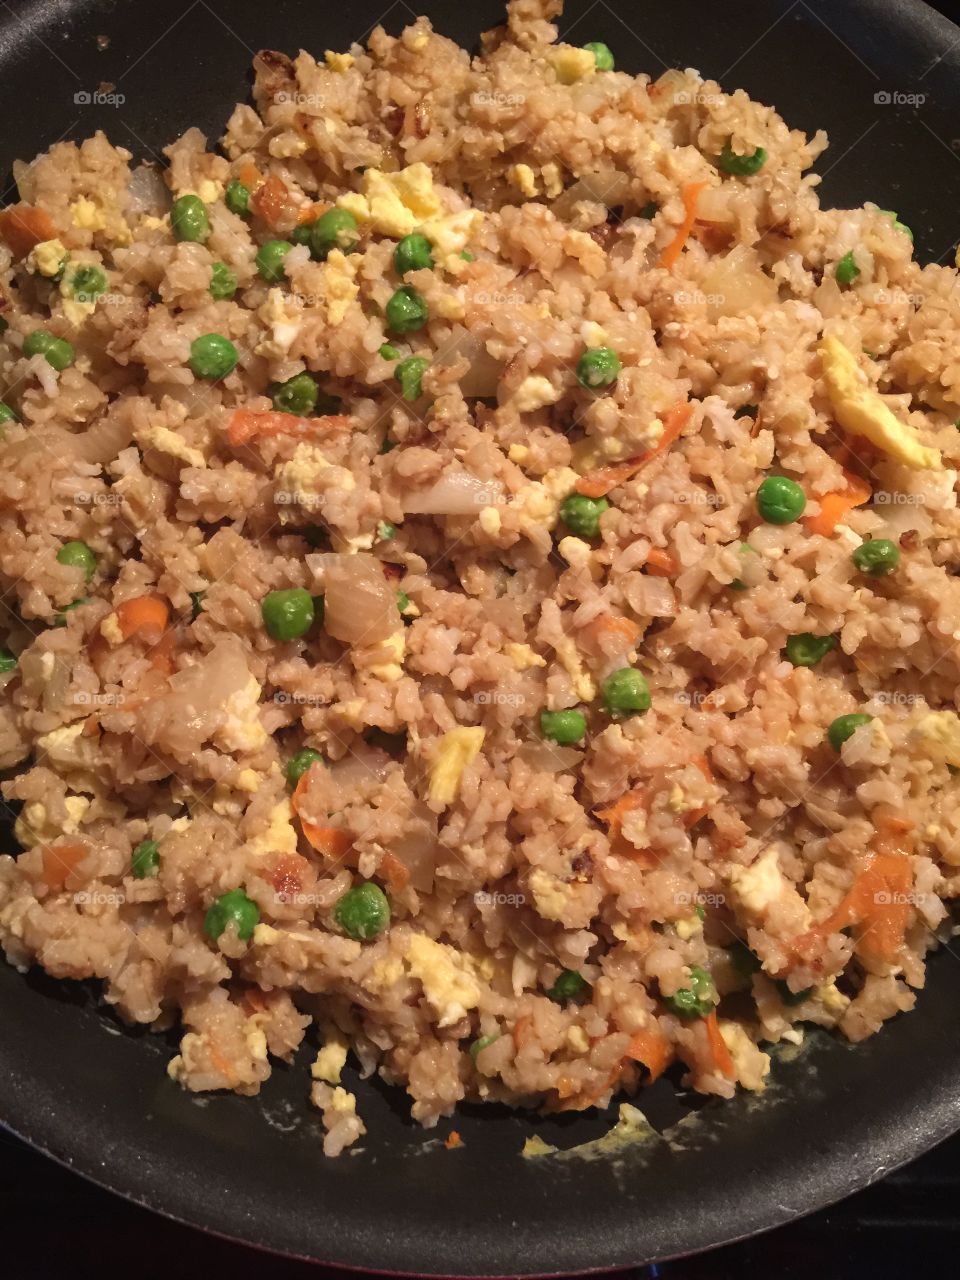 Stir fried rice made for my daughter with love she’s my heart 